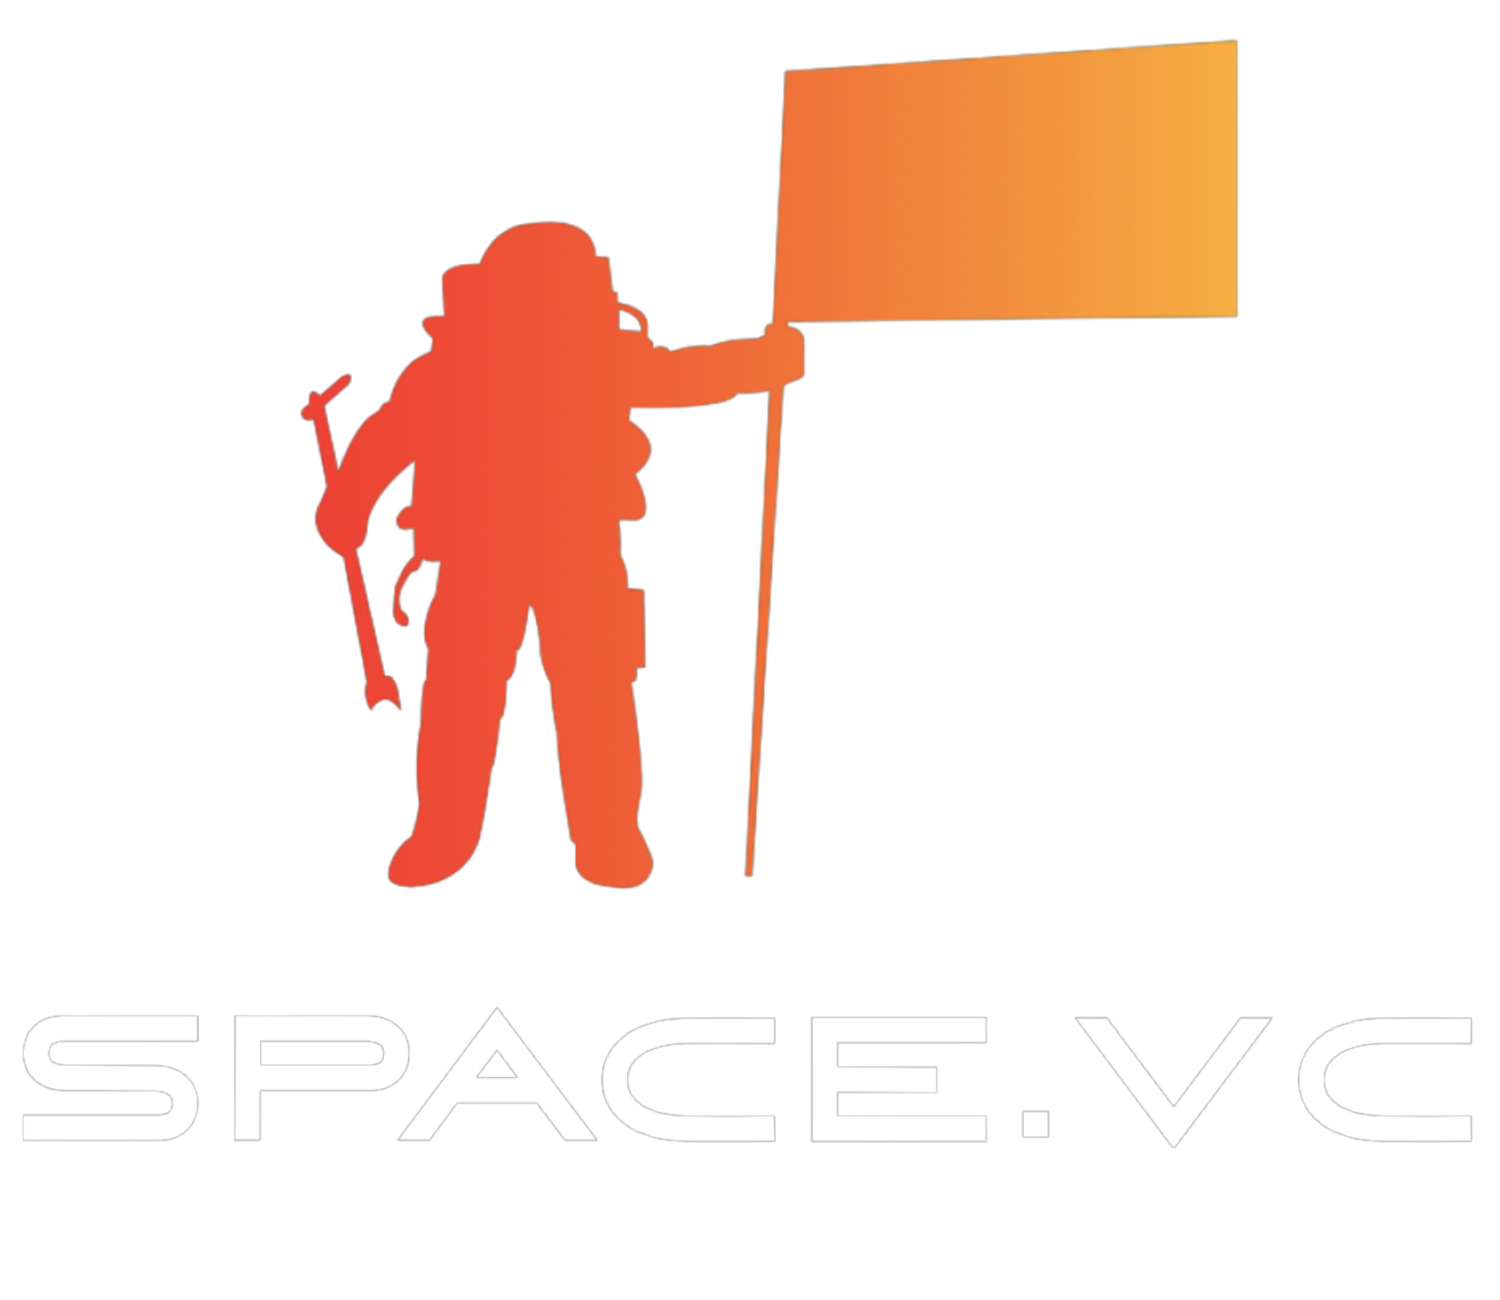 Space.VC